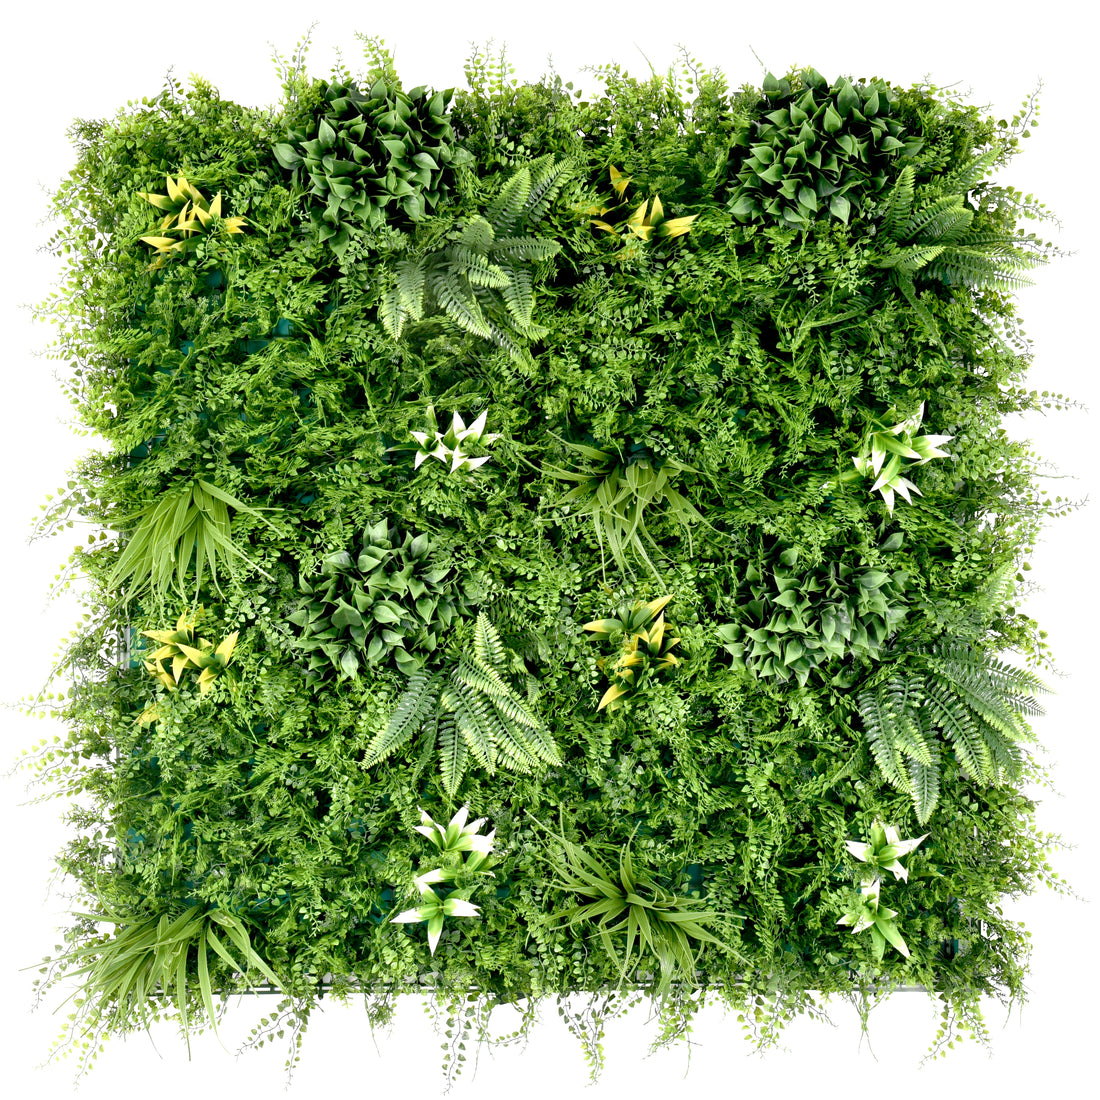 The Benefits of Artificial Green Walls